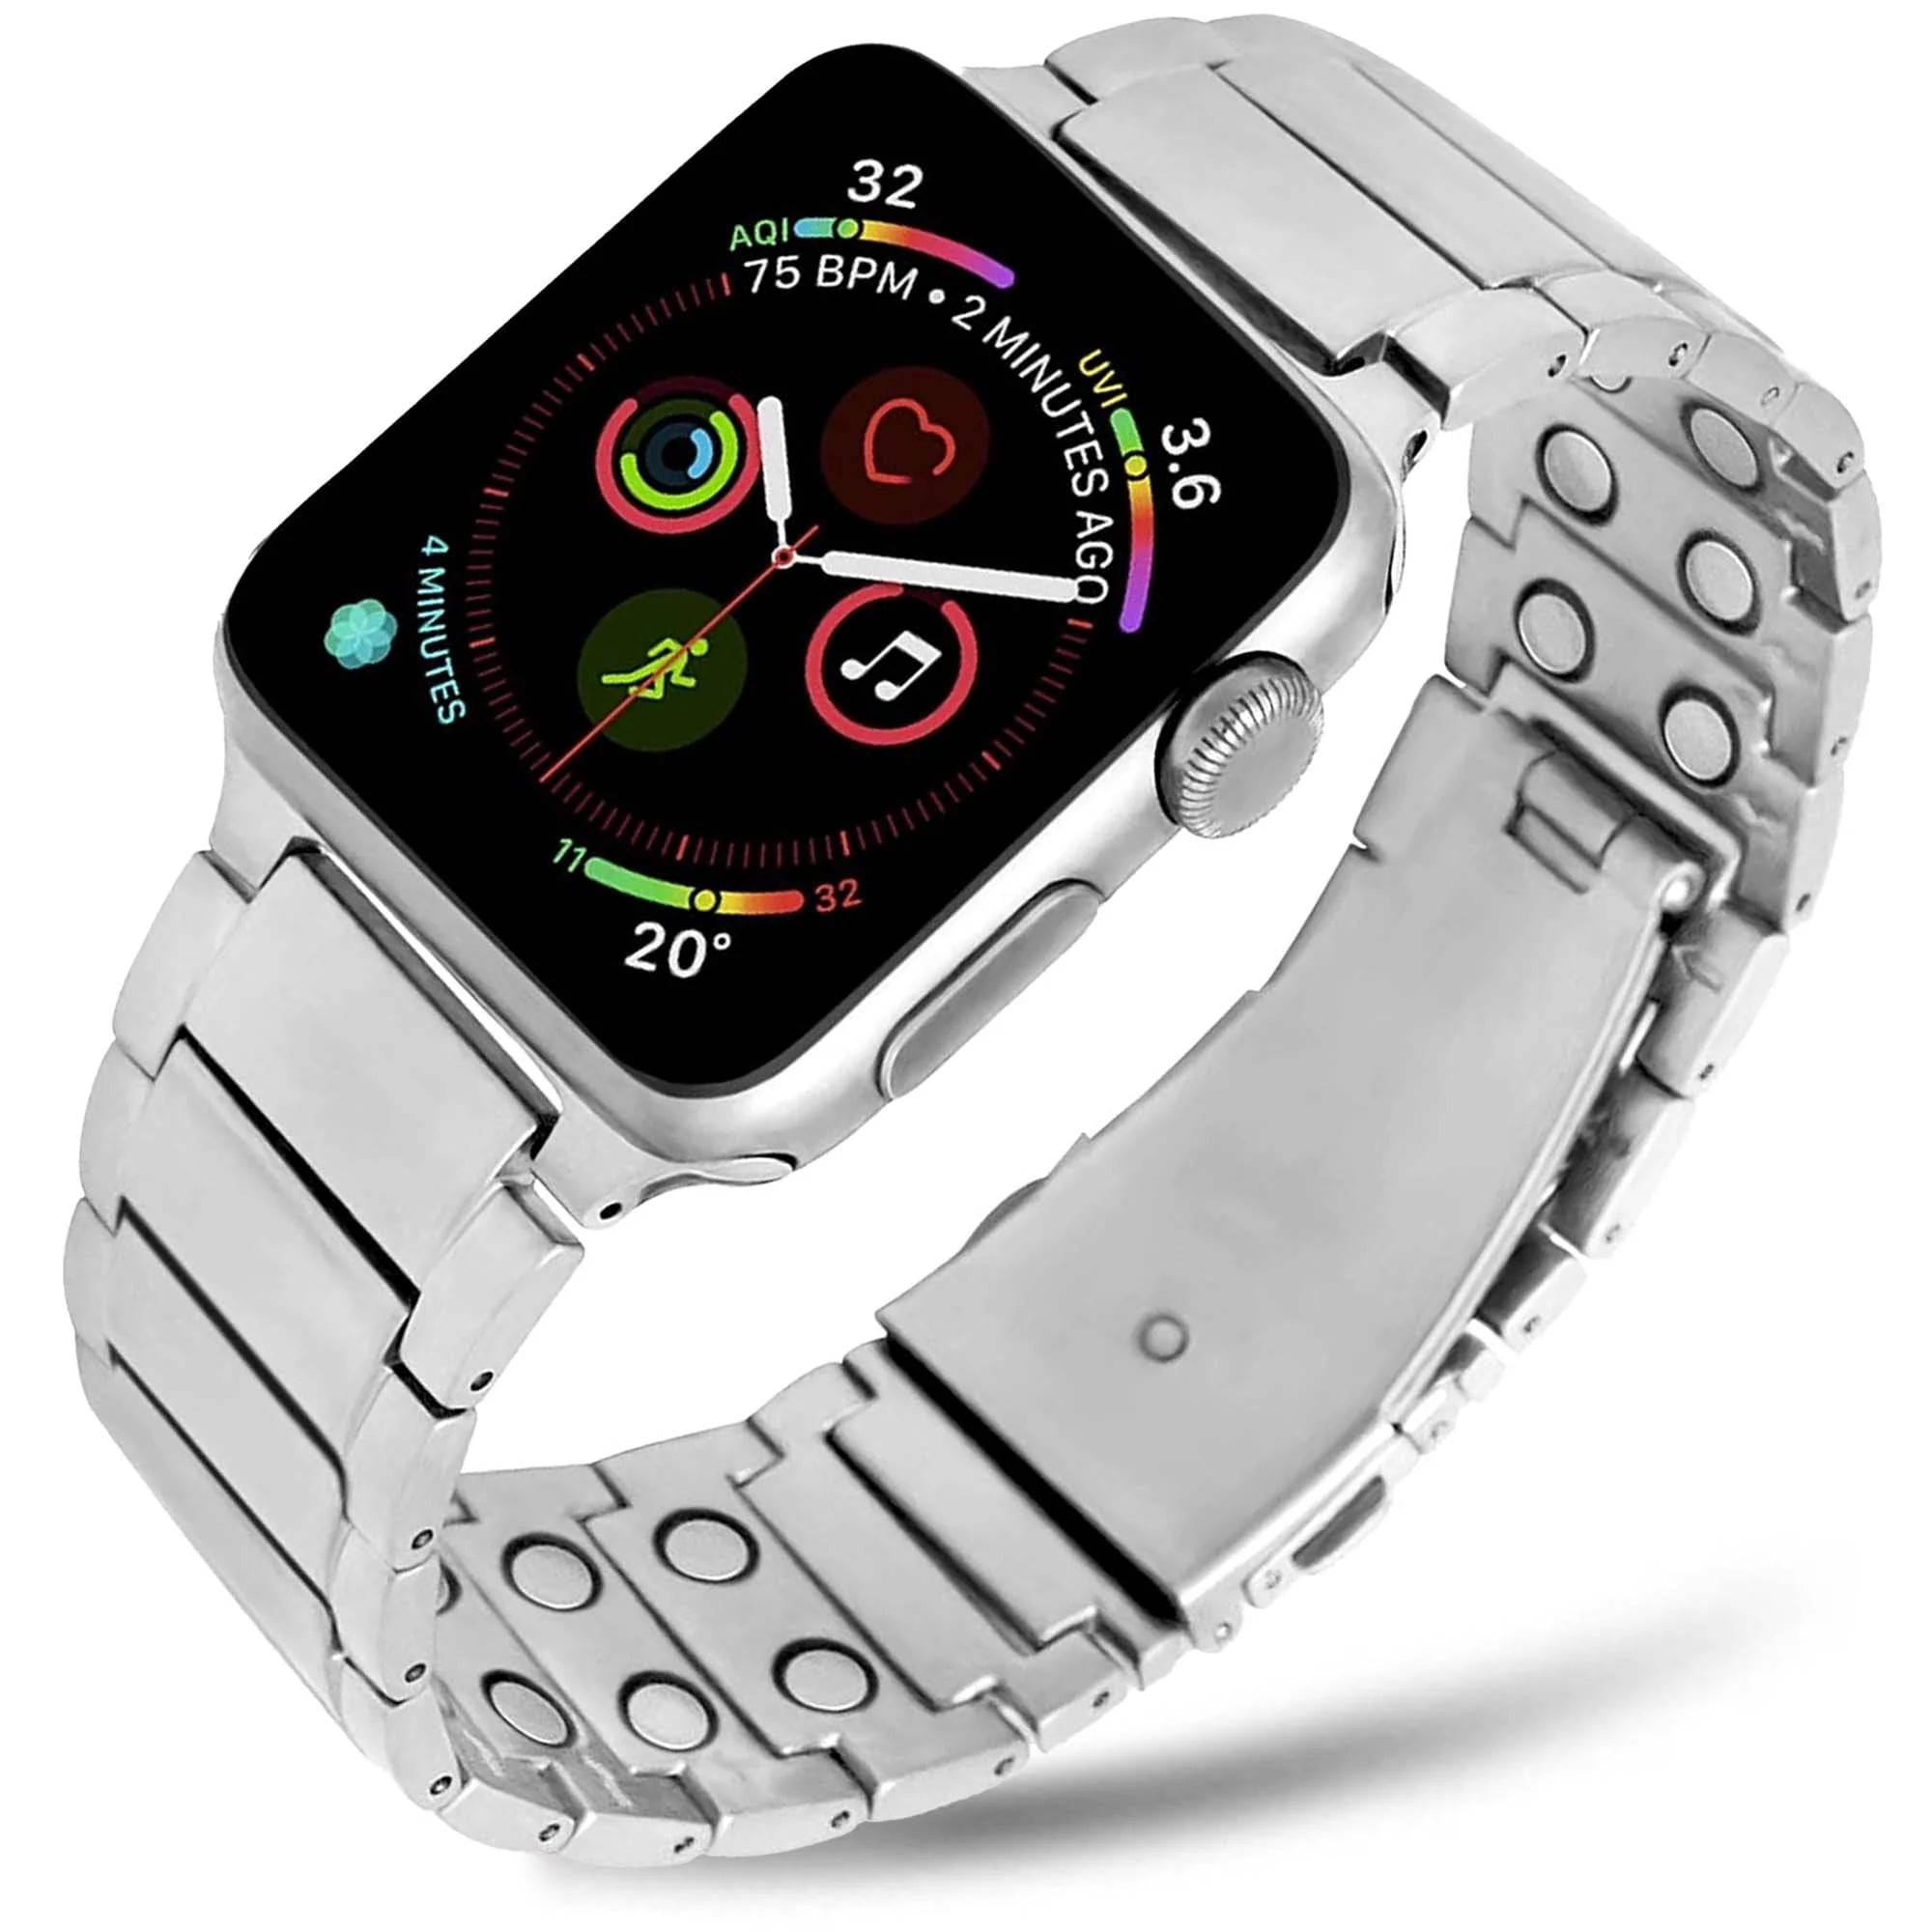 MagnetRX Magnetic Therapy Apple Watch Band - 316L Stainless Steel Ultra Strength Magnet Therapy Watch Band Compatible for Apple Watch Series 7/6/5/4/3